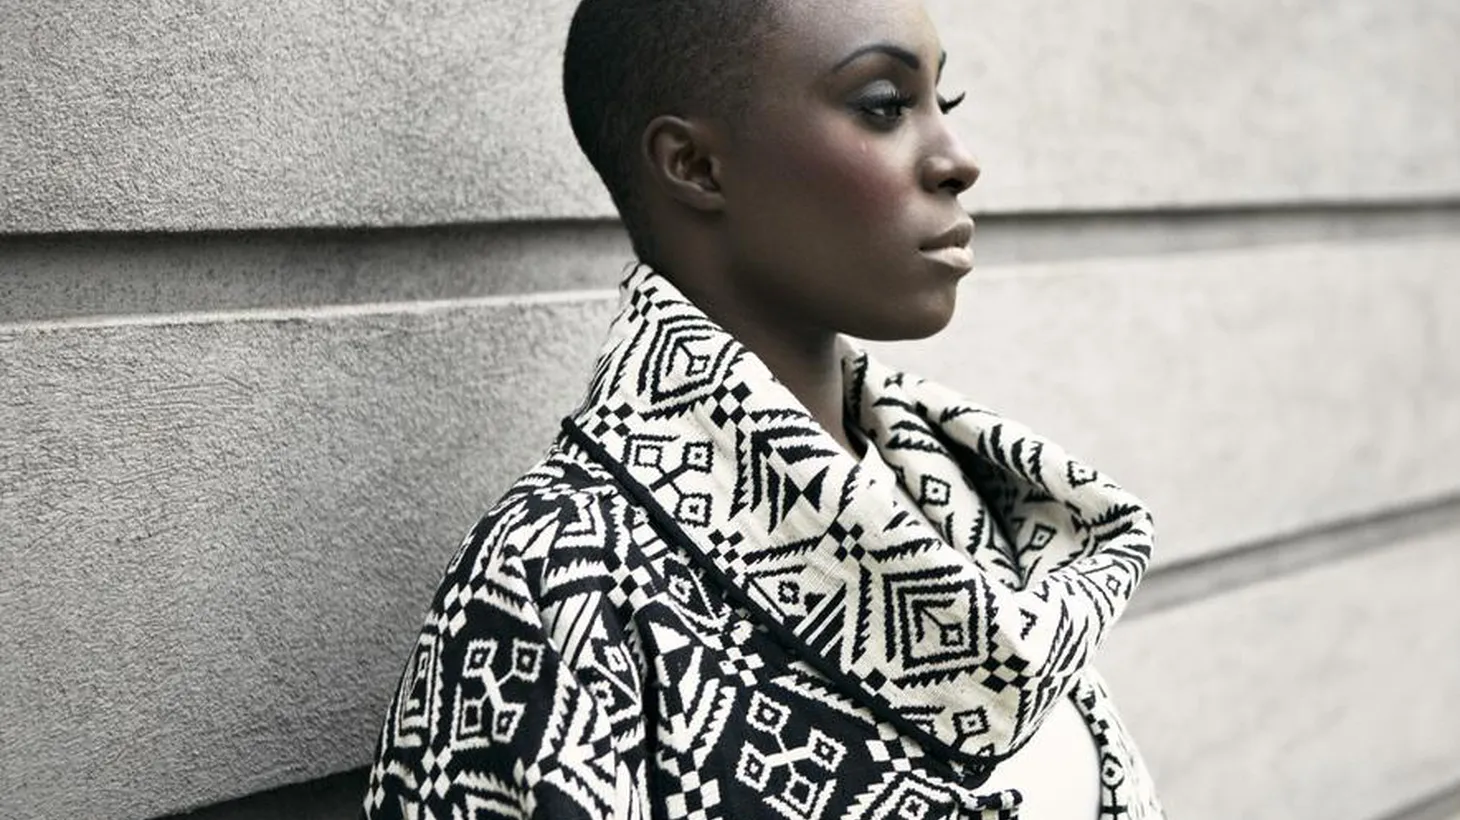 There are many artists that tap into vintage 60's soul in their songs, but Laura Mvula really stands out.